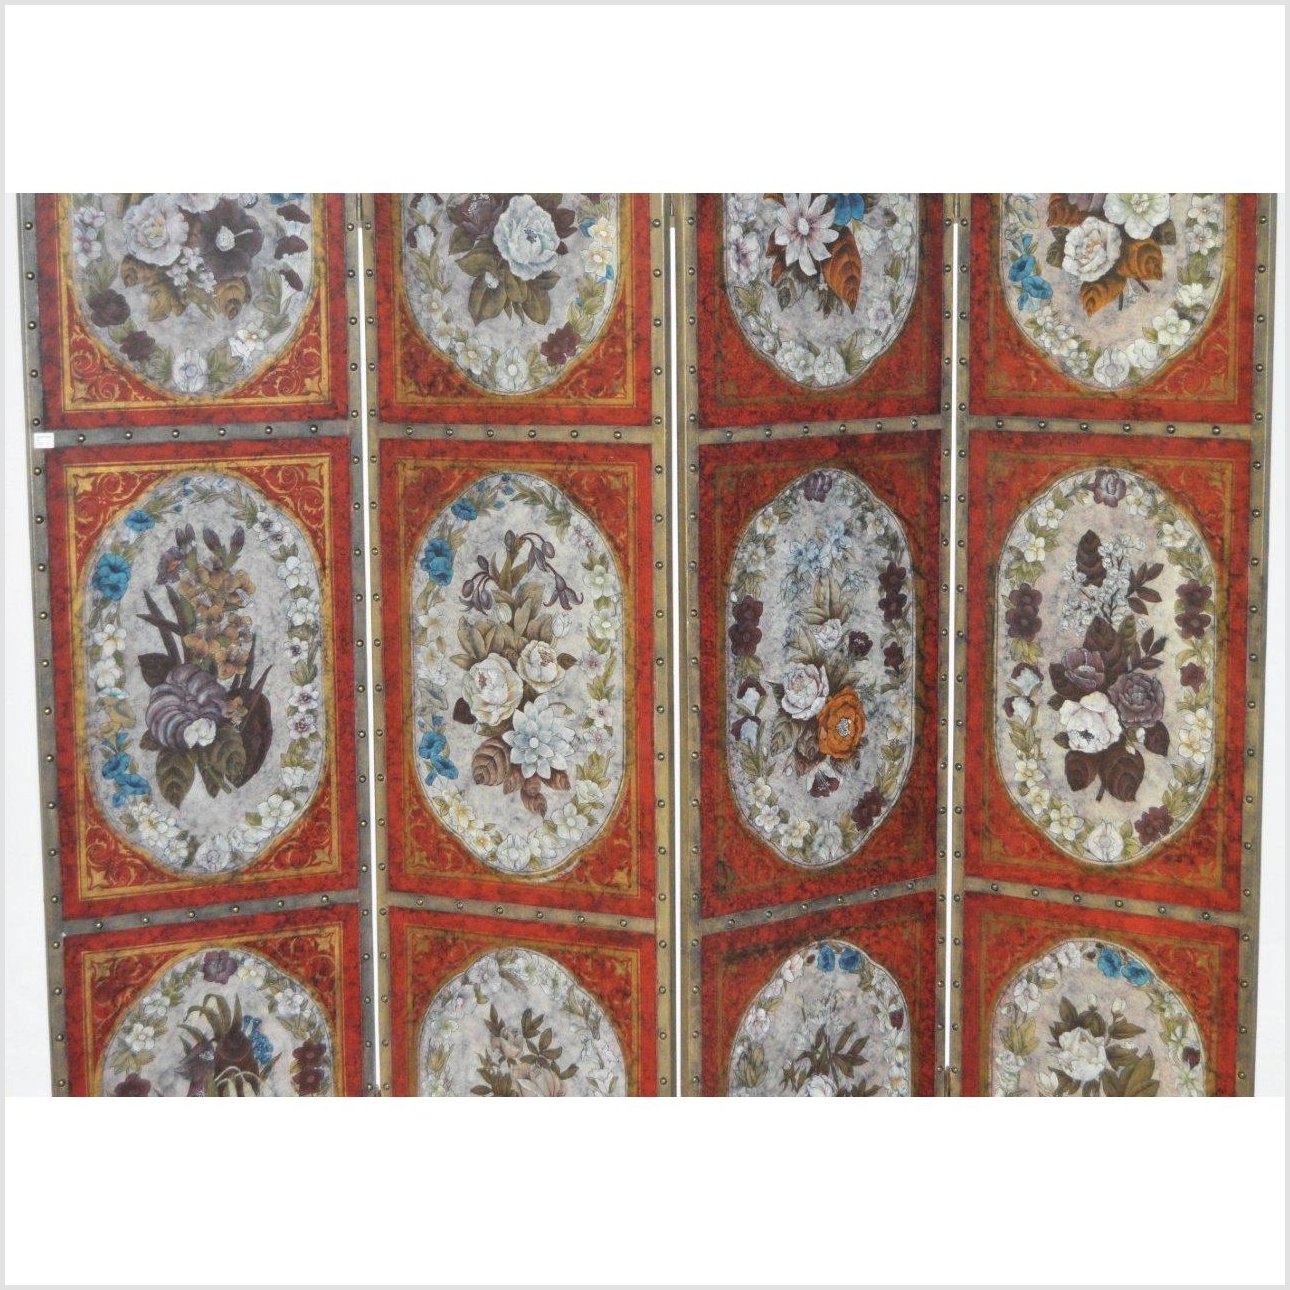 4-Panel Screen with Victorian Style Floral Design-YN2773-4. Asian & Chinese Furniture, Art, Antiques, Vintage Home Décor for sale at FEA Home